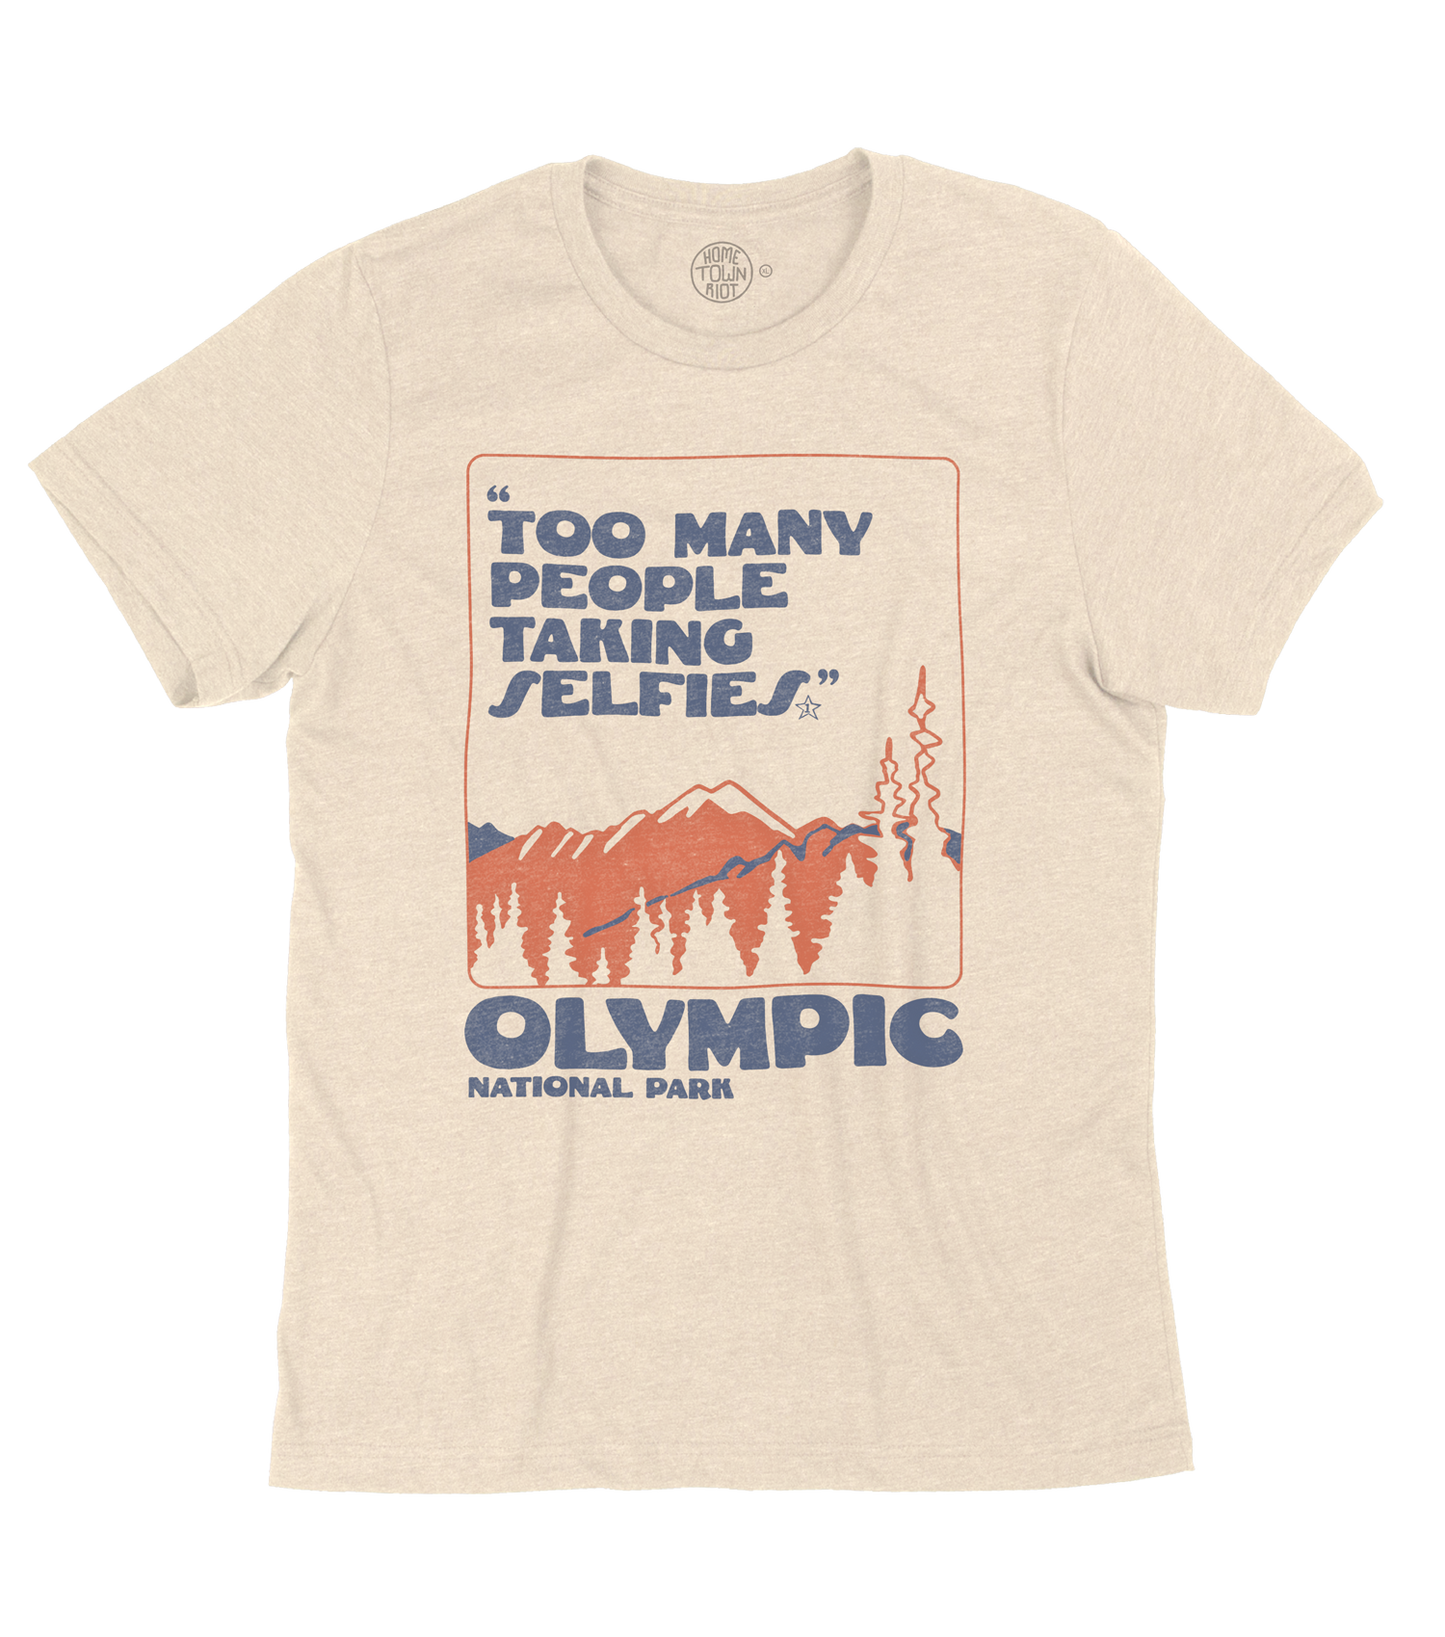 Olympic National Park 1 Star Review Shirt